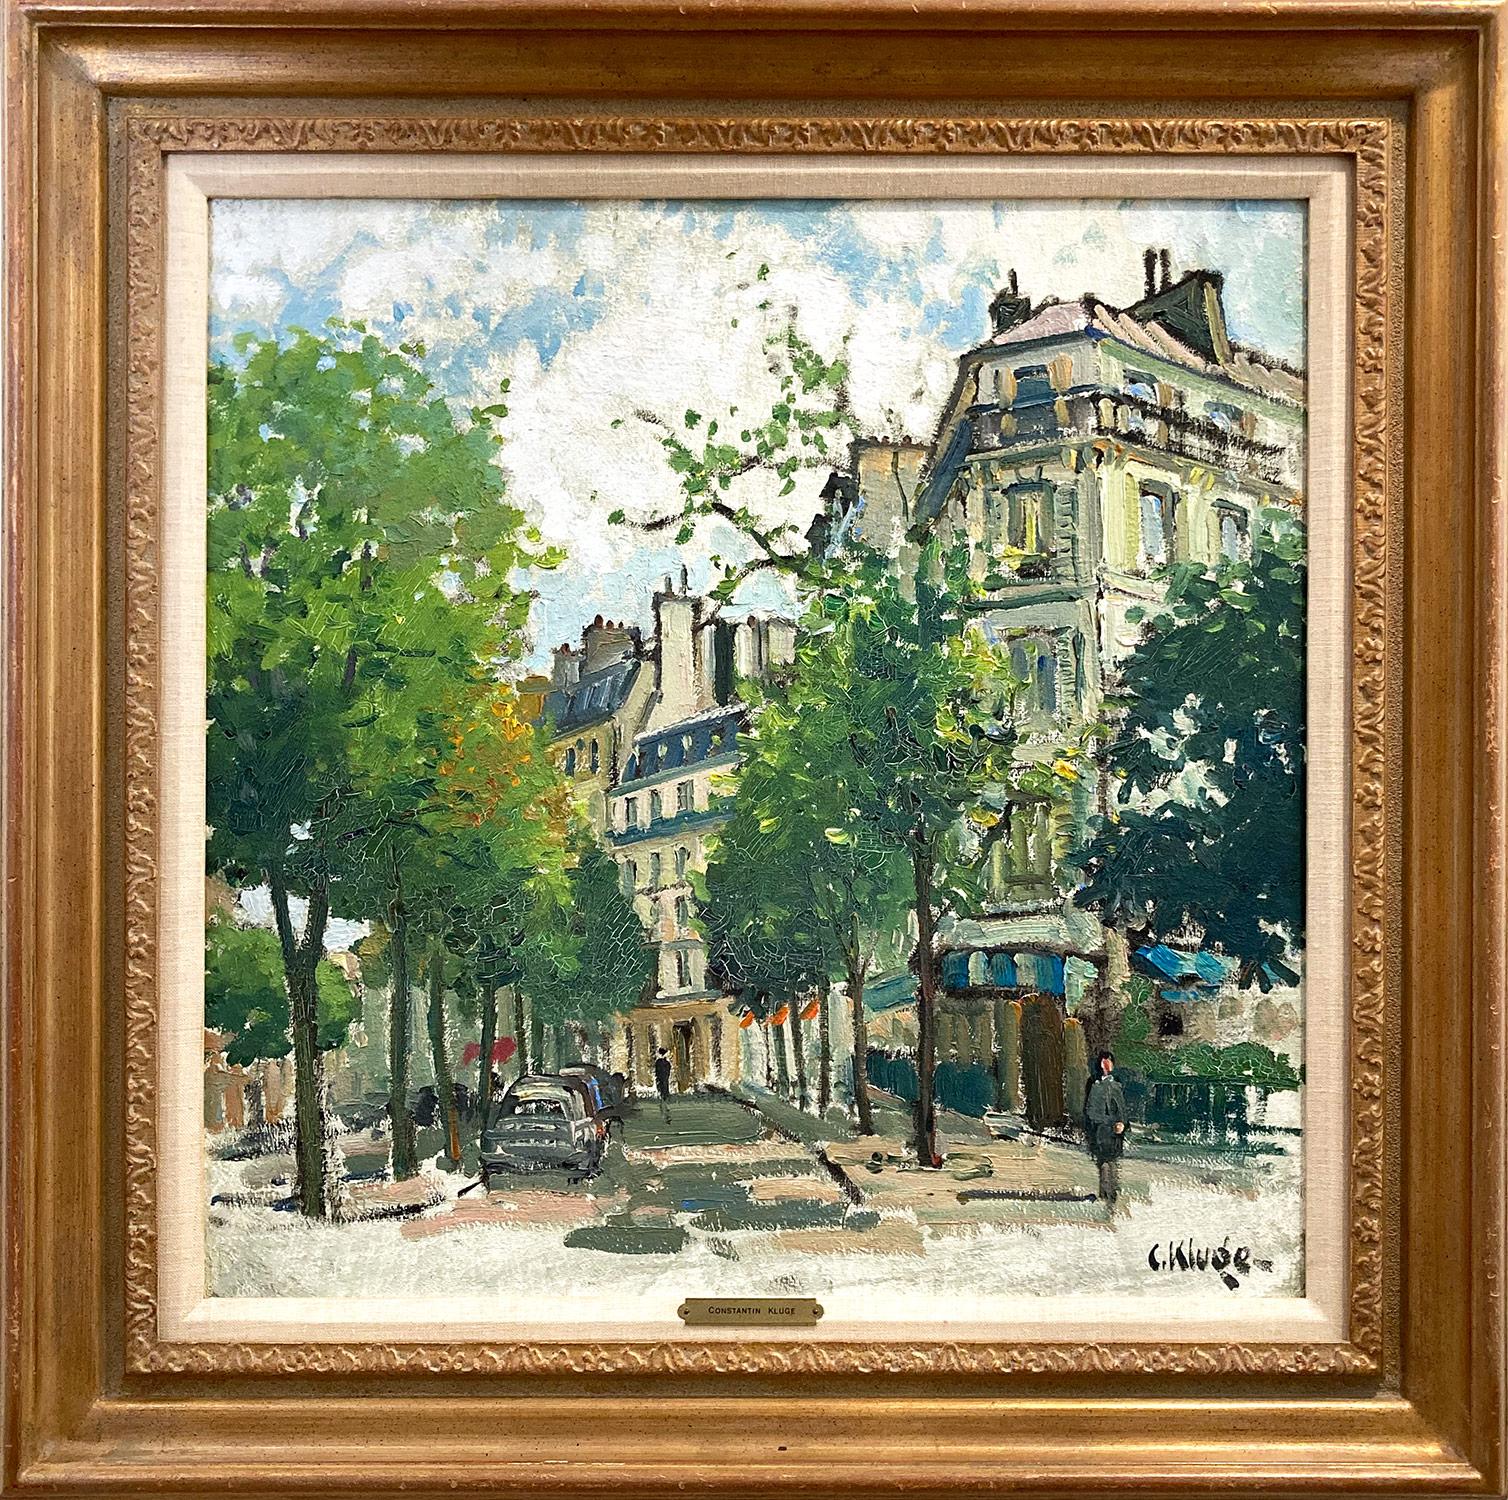 Constantin Kluge Landscape Painting - "Parisian Street Scene" French Post-Impressionist Plein Air Painting on Canvas